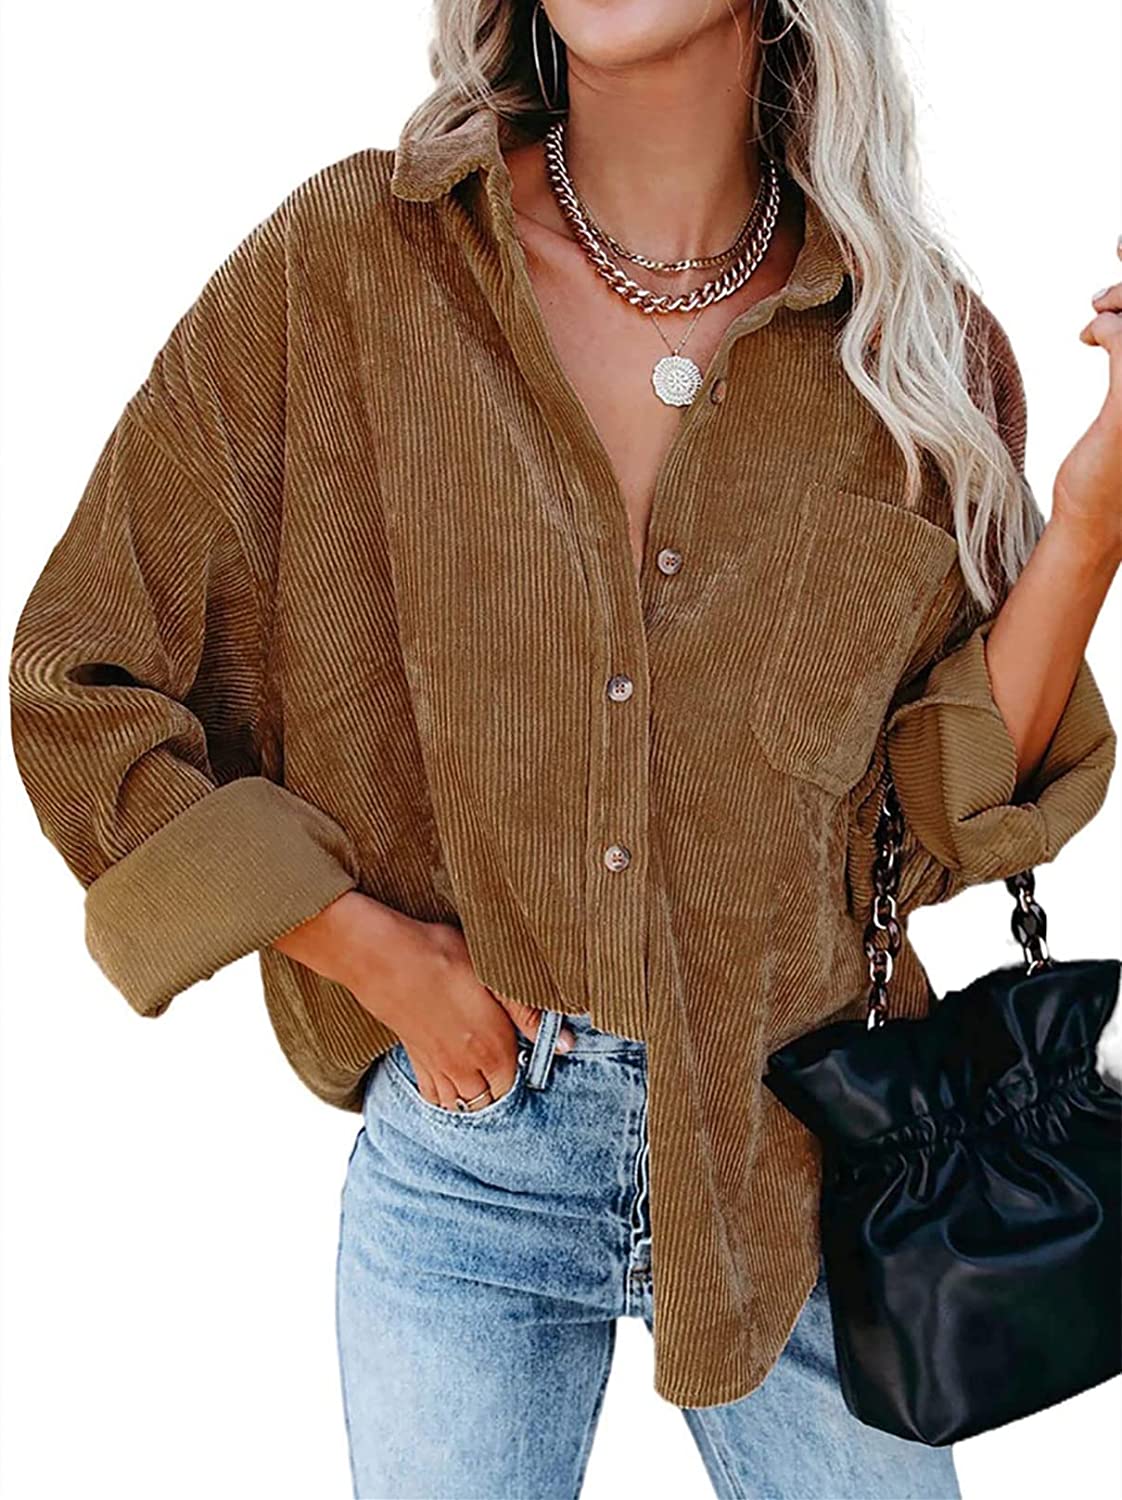 Actloe Womens Corduroy Shirt Long Sleeve Oversized Button Down Blouses Tops Loose Casual Jacket with Pockets 